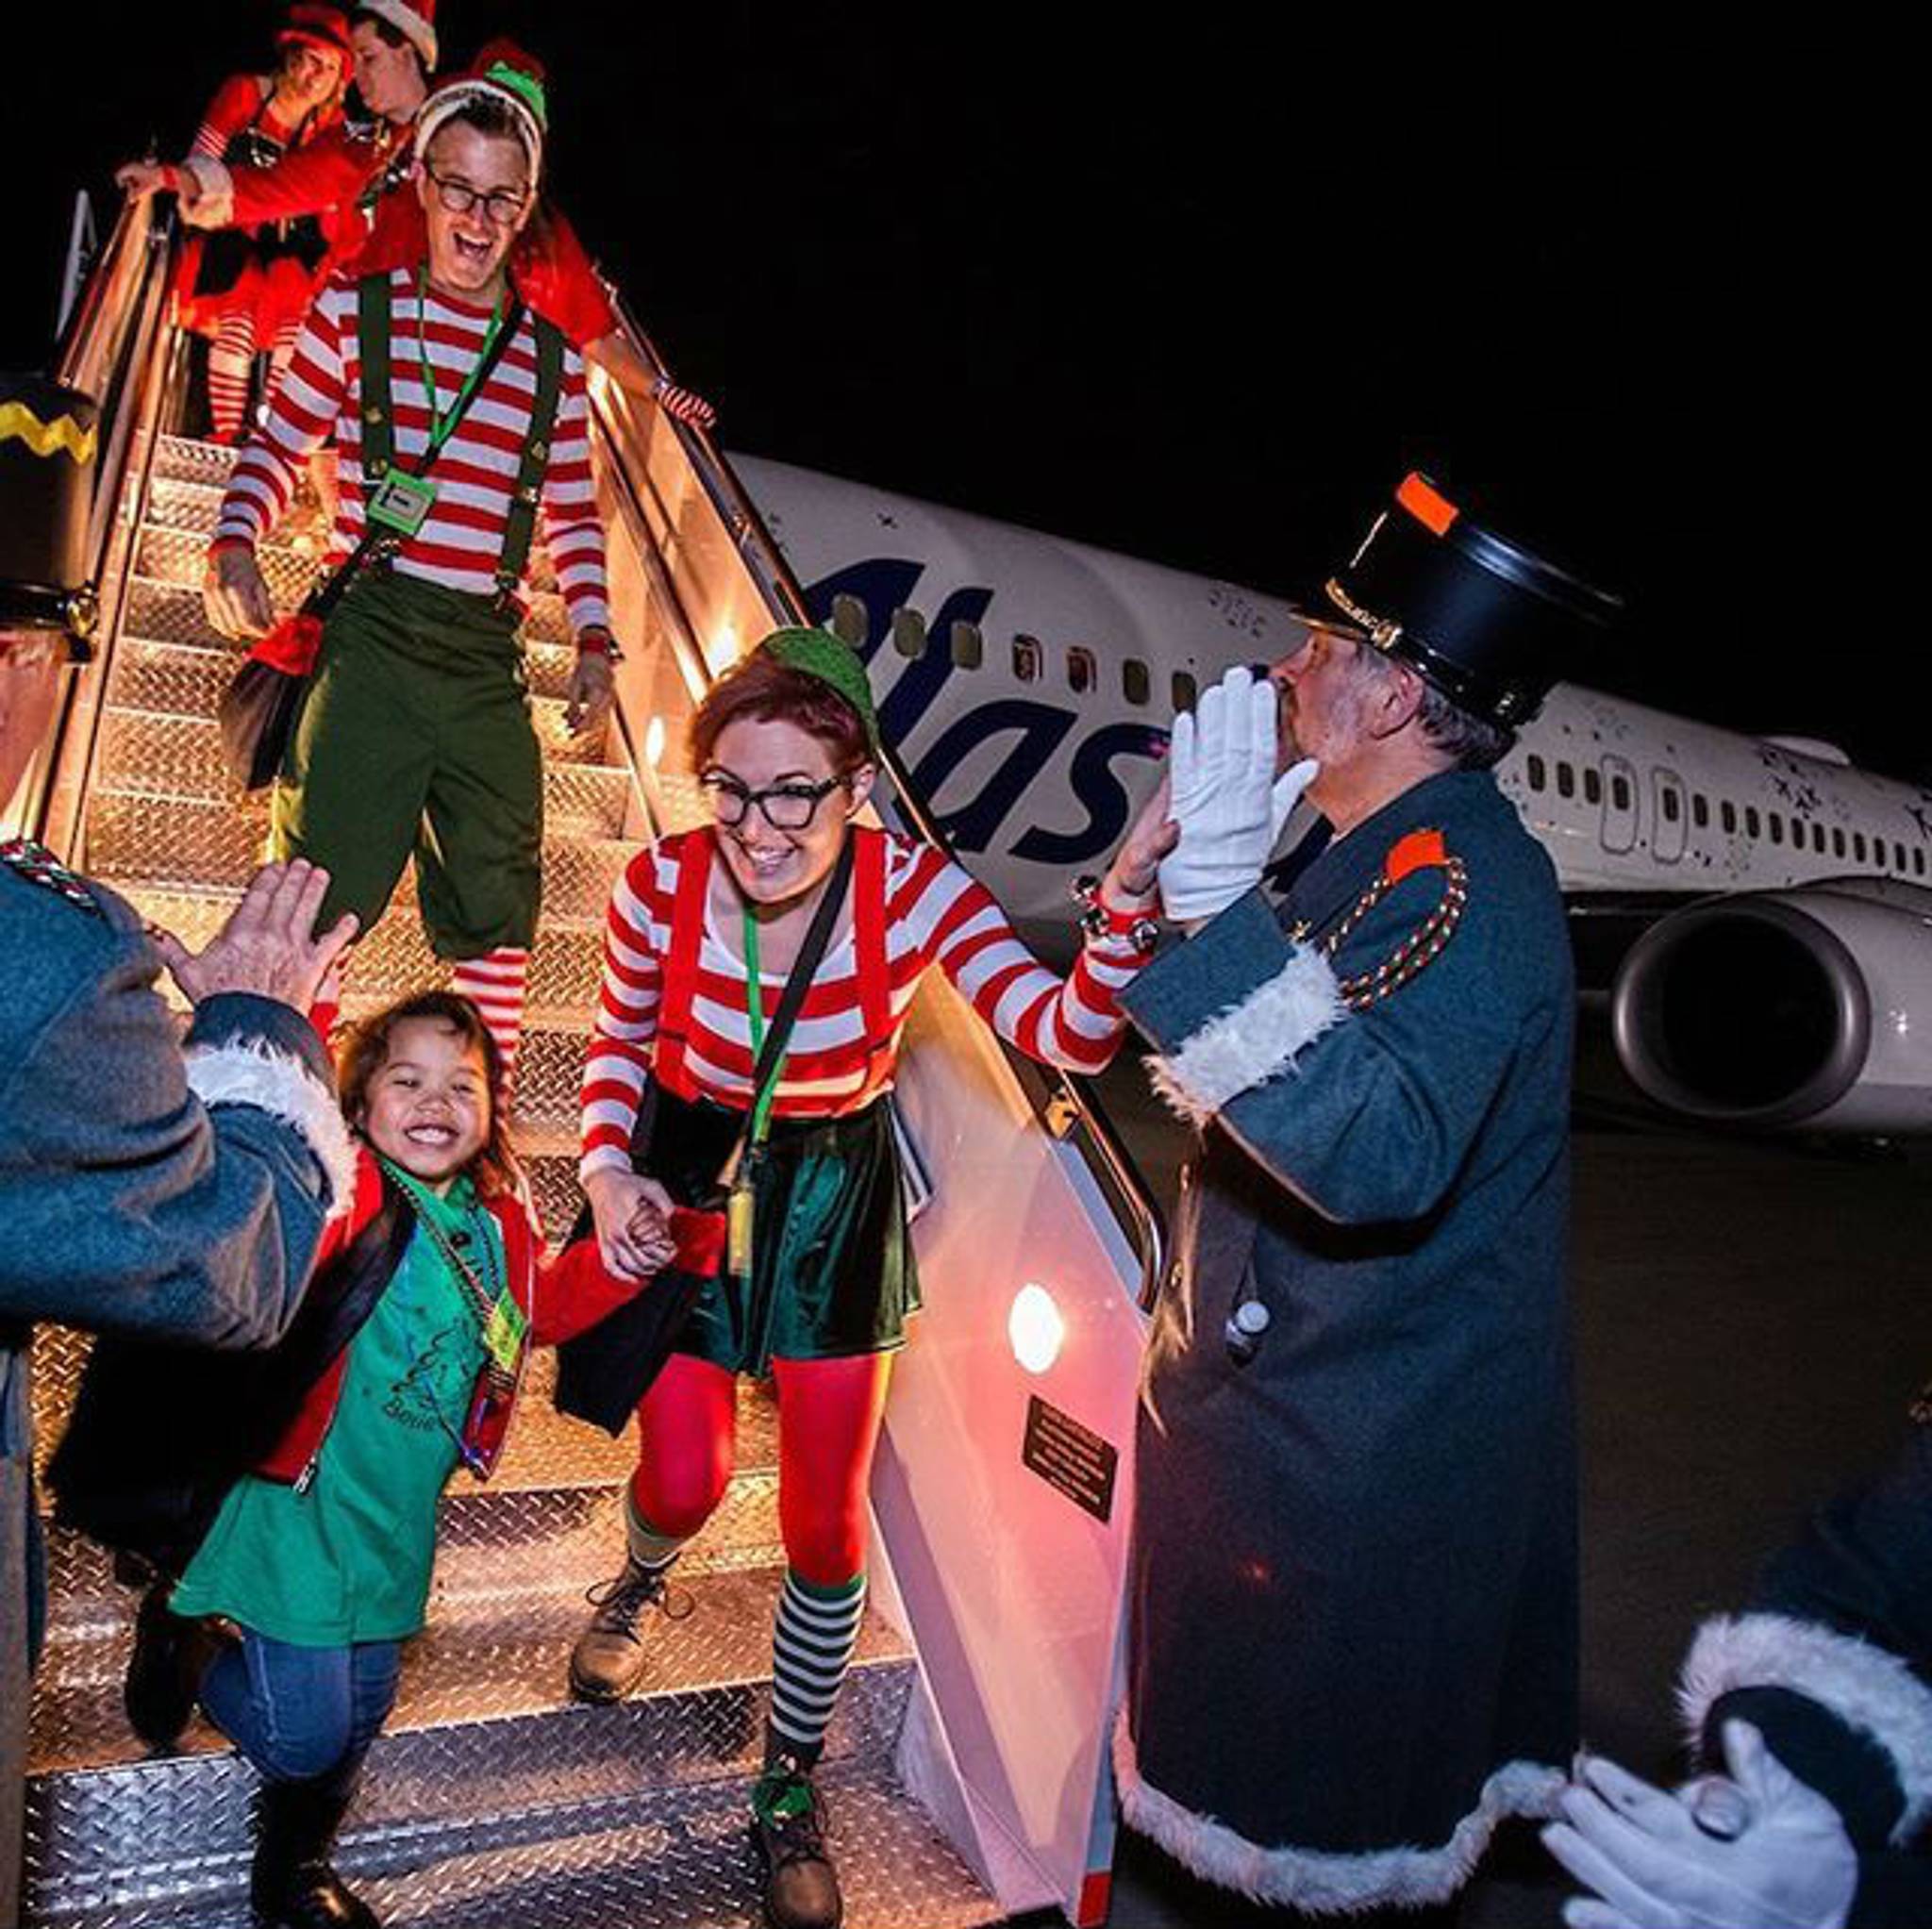 Alaska Airlines brings stress relief to festive flyers